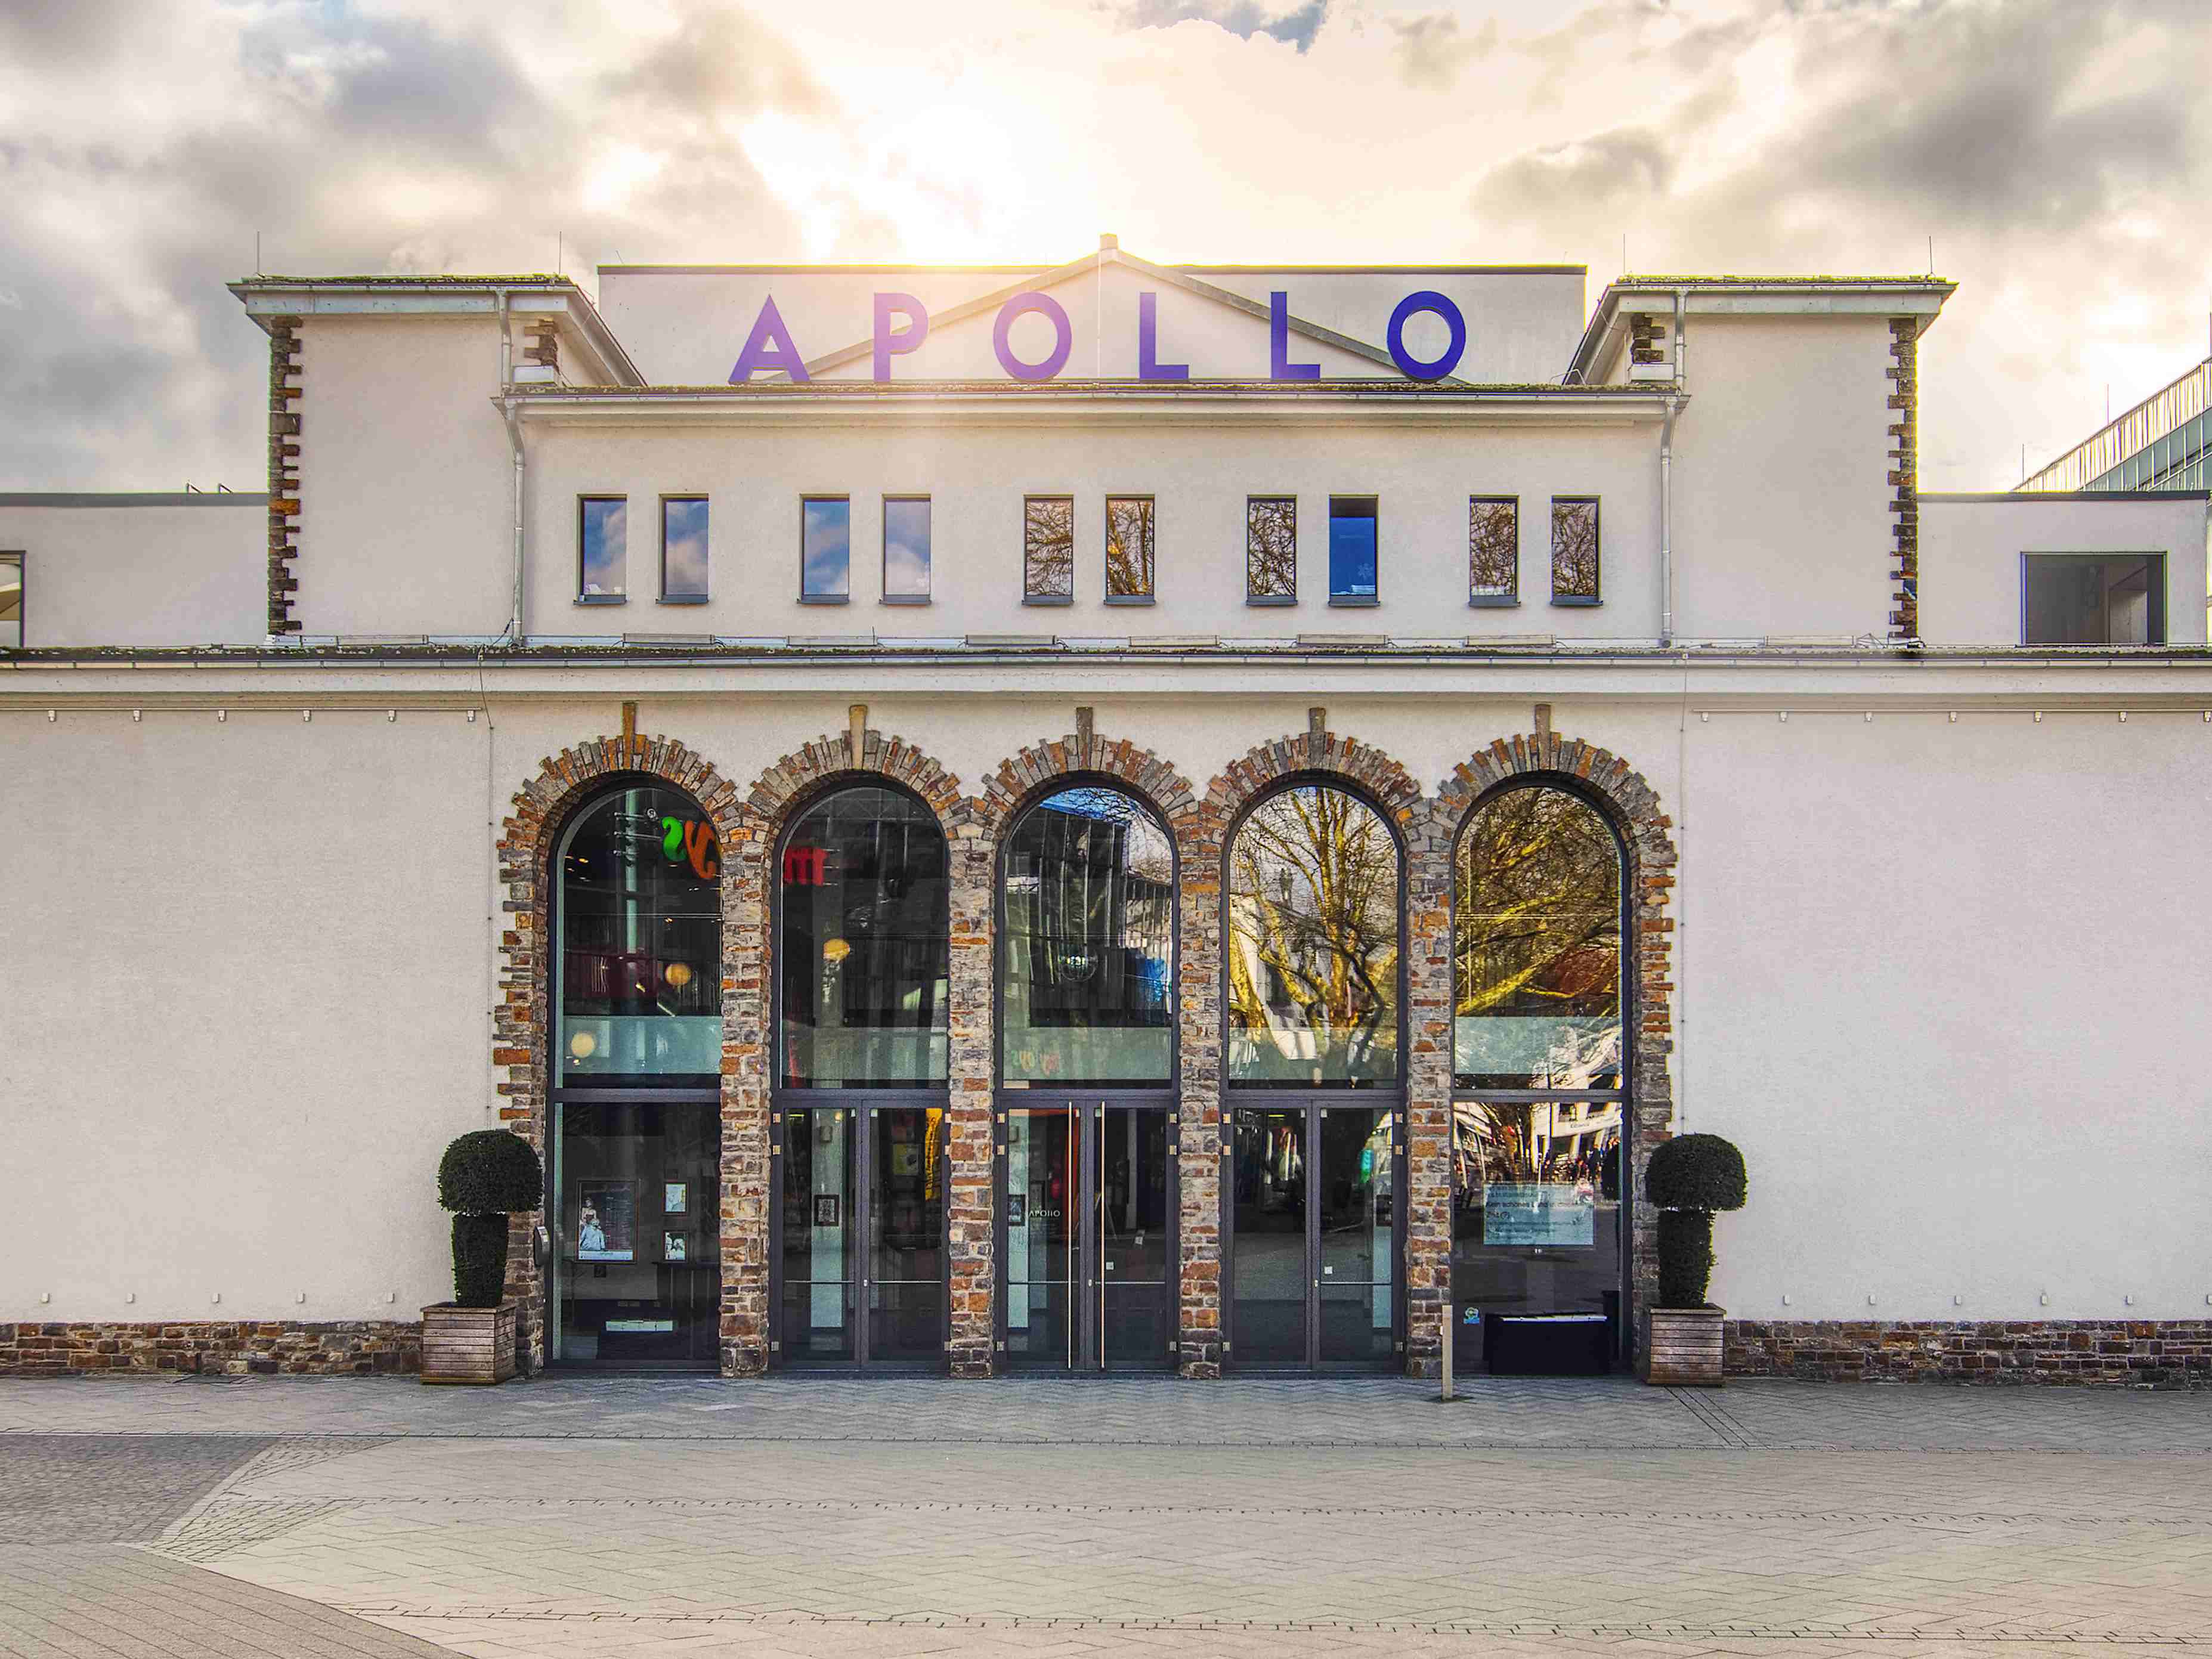 Apollo Theater Siegen less than 10 minutes on foot from the hotel.